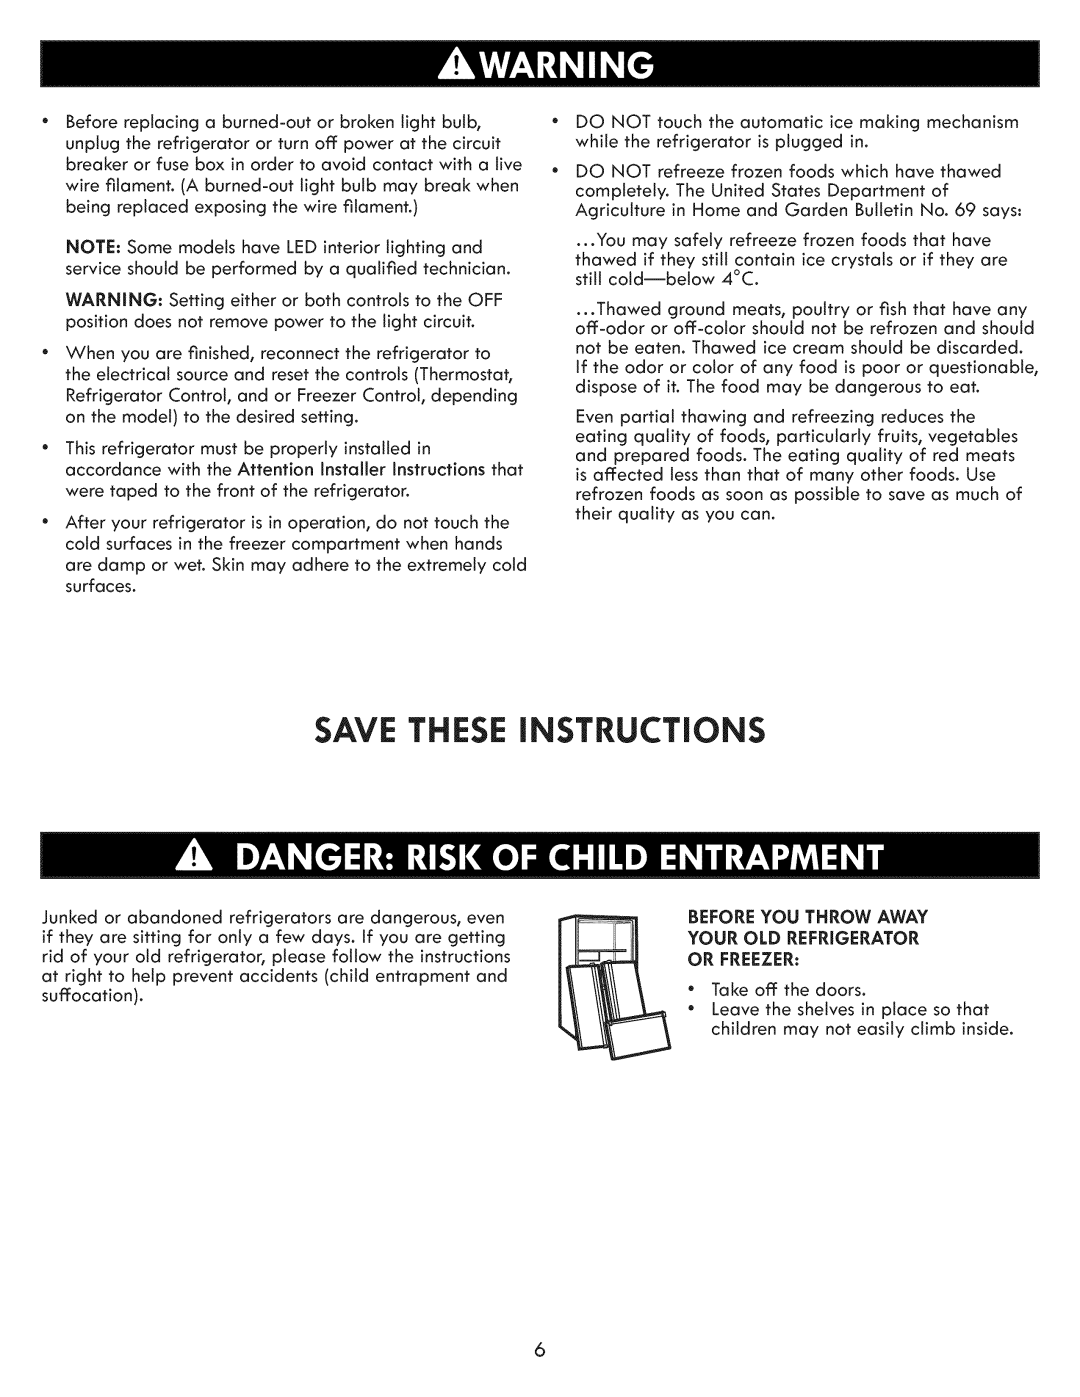 Kenmore 795.7103 manual Save These Instructions, Before You Throw Away Your Old Refrigerator 